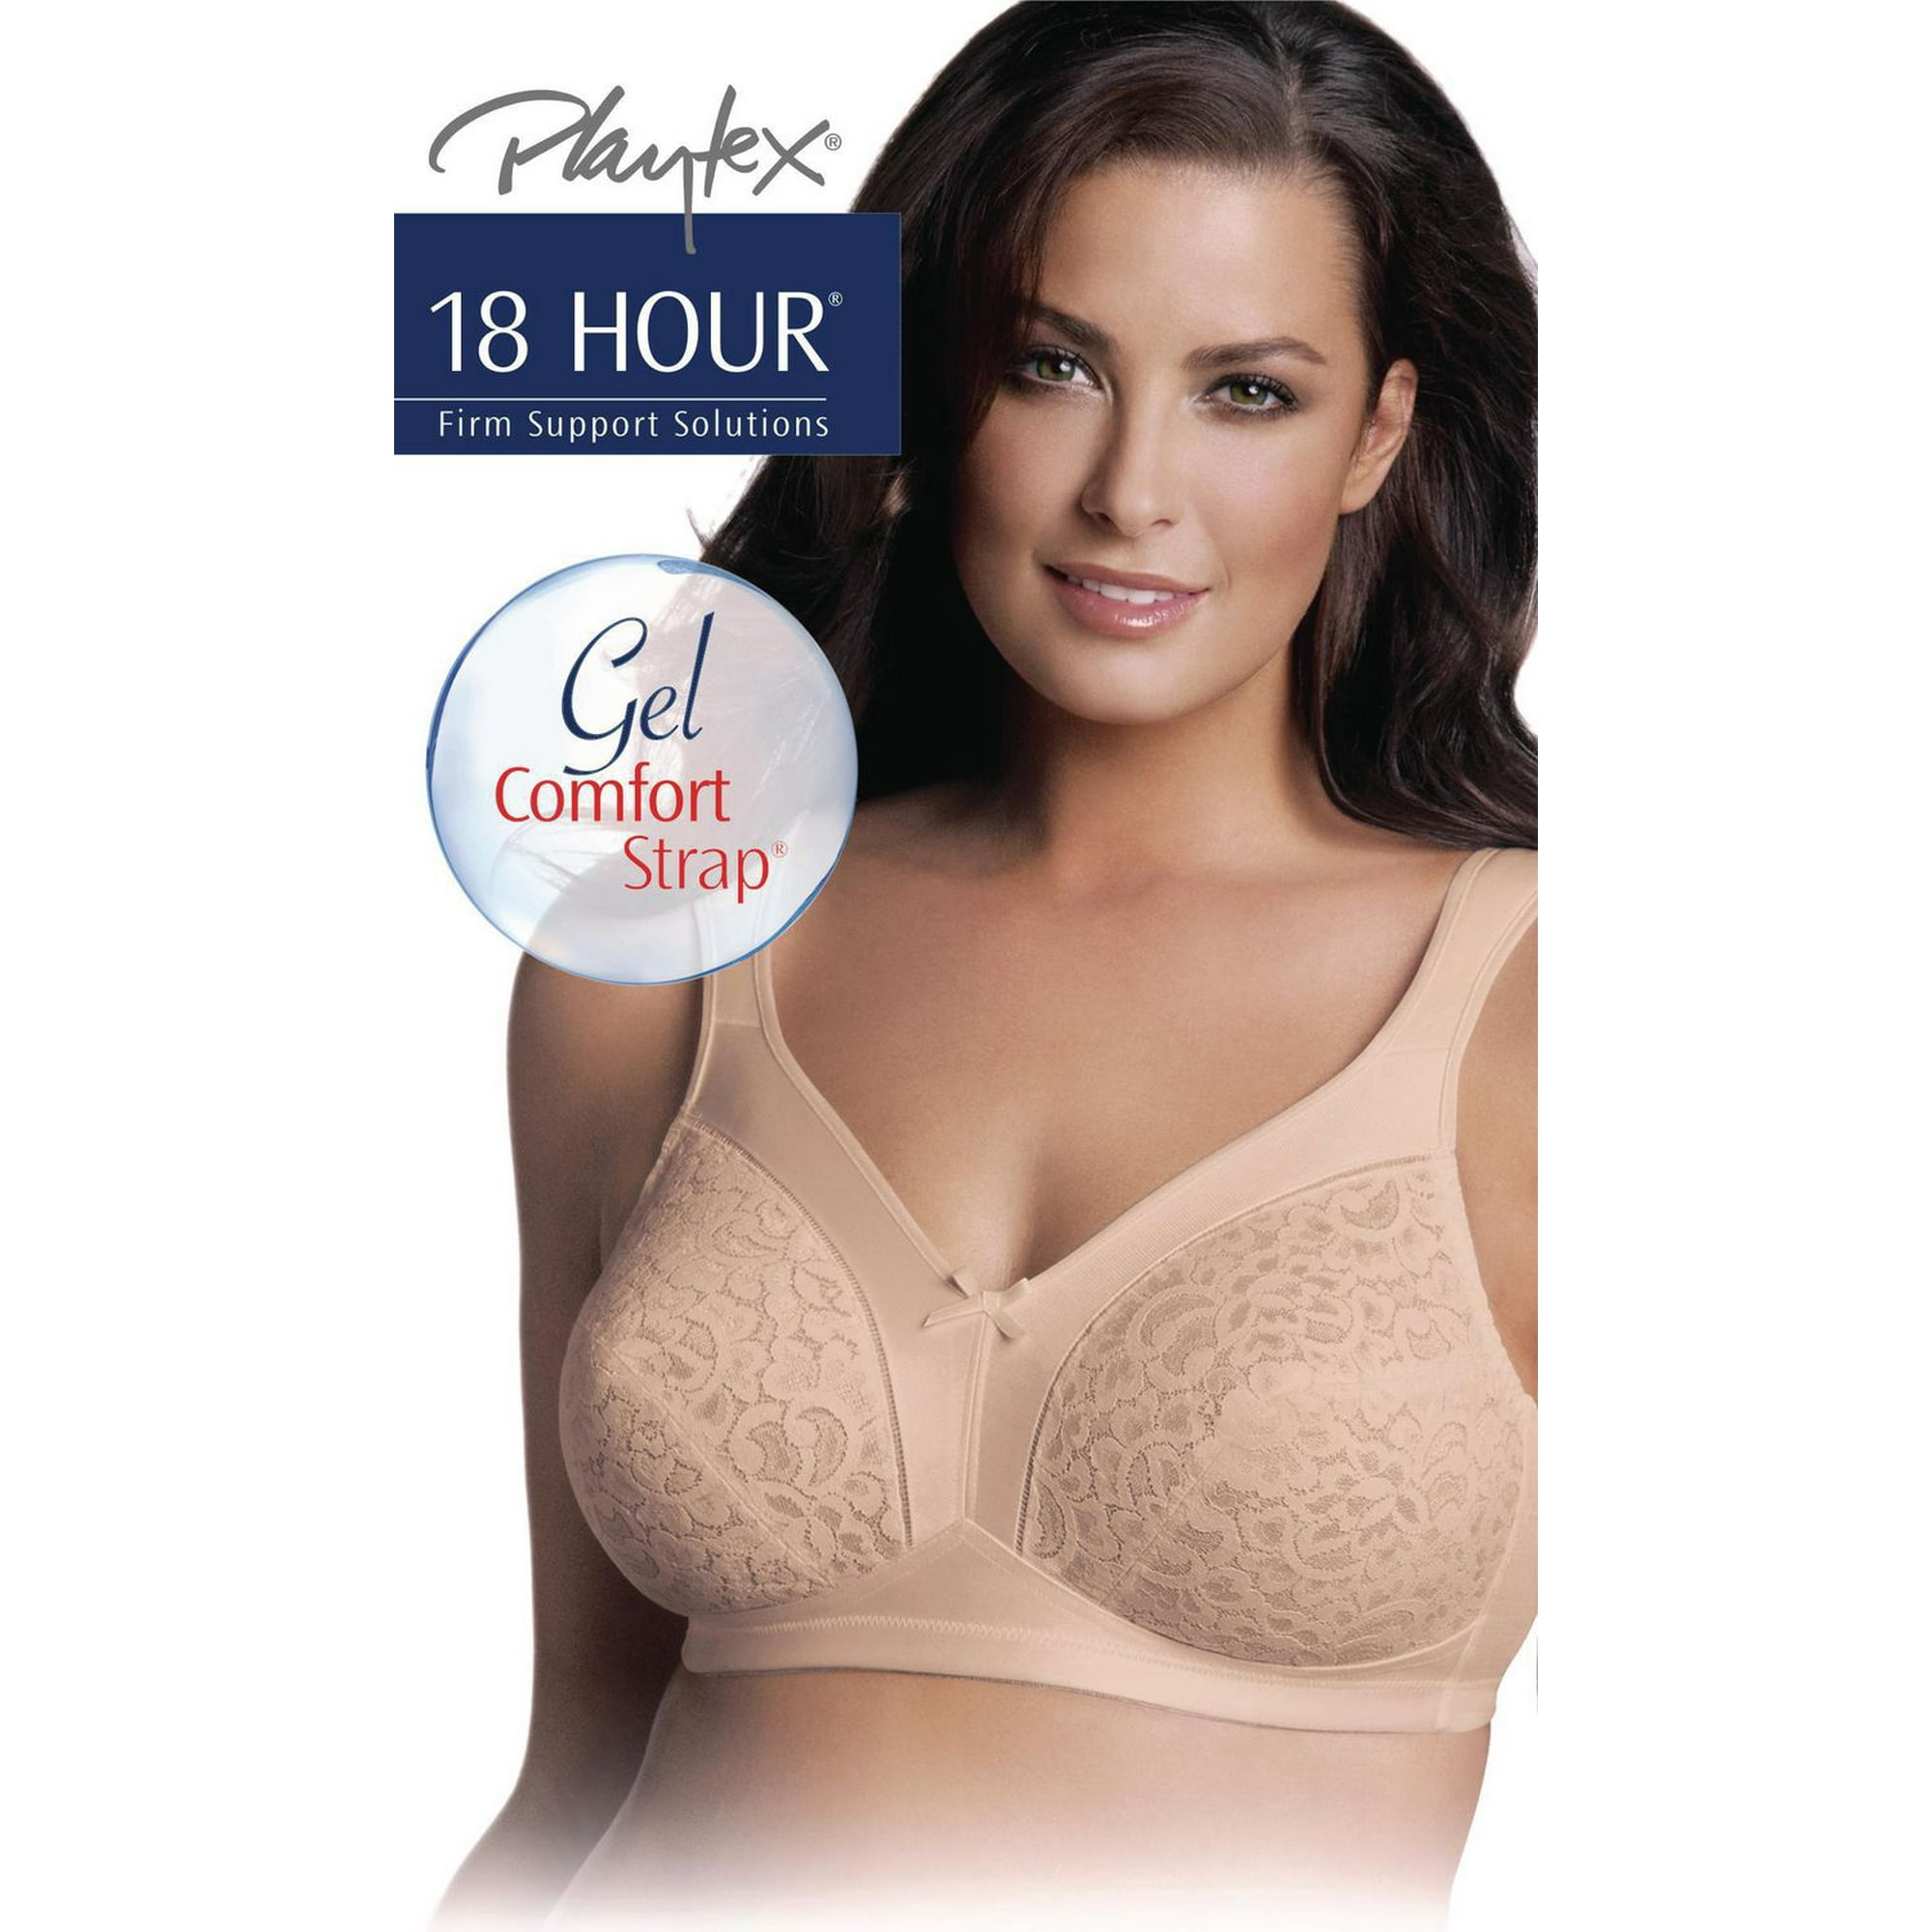 NEW WOMEN SIZE 44D PLAYTEX 18 HOUR ULTIMATE SHOULDER COMFORT WIREFREE BRA  WHITE - Helia Beer Co